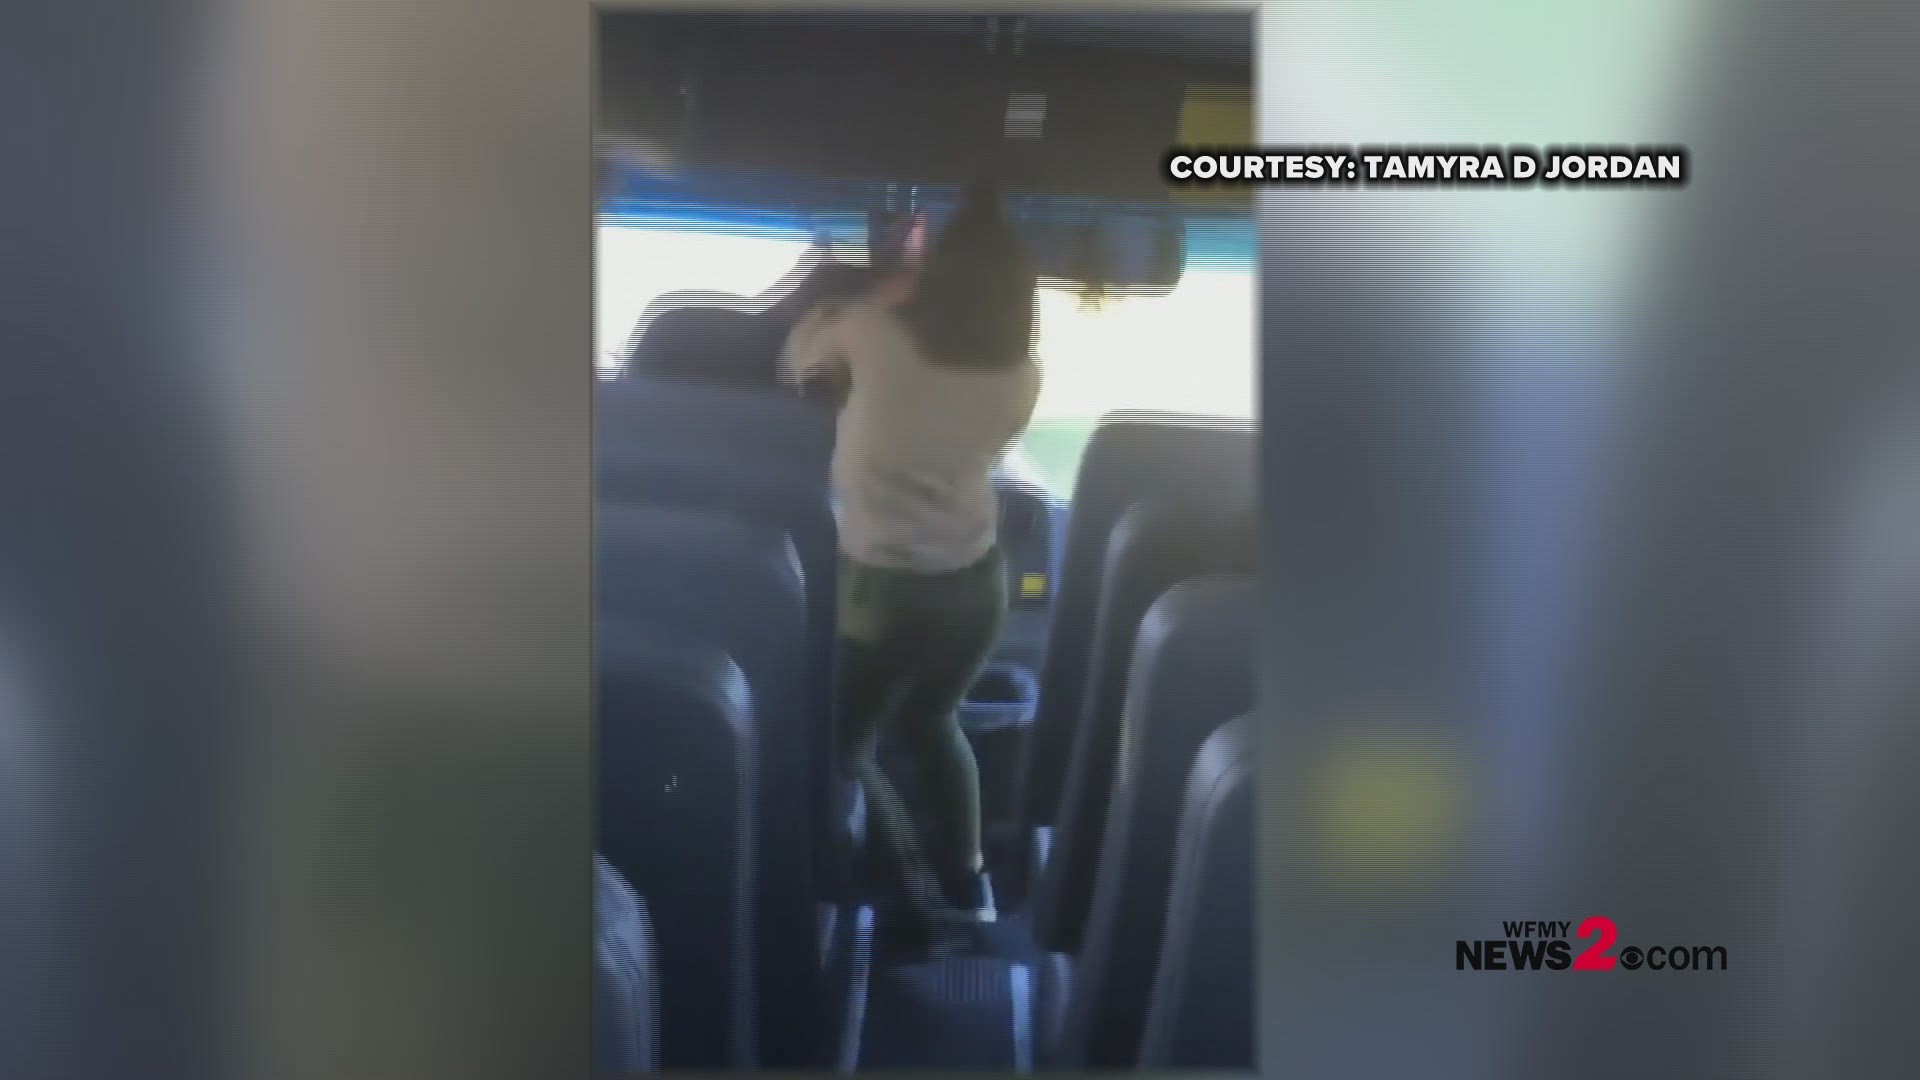 Video was captured on the bus Monday morning. Police say the student has been charged with assault.